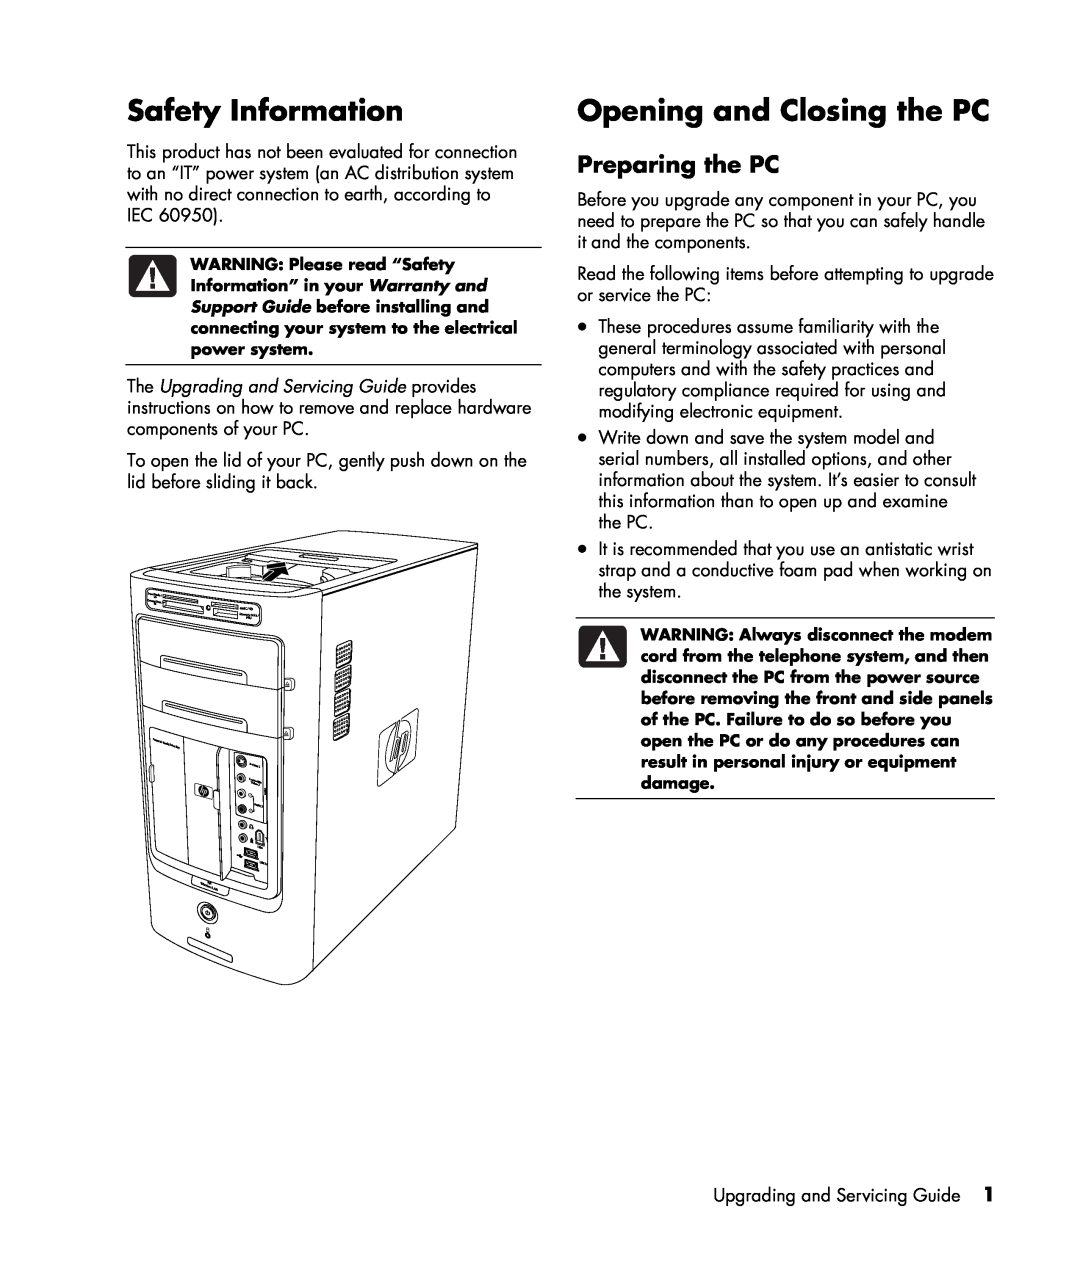 HP m7177a, m7188d, m7177d, m7181.uk, m7183c, m7177c, m7163w Safety Information, Opening and Closing the PC, Preparing the PC 